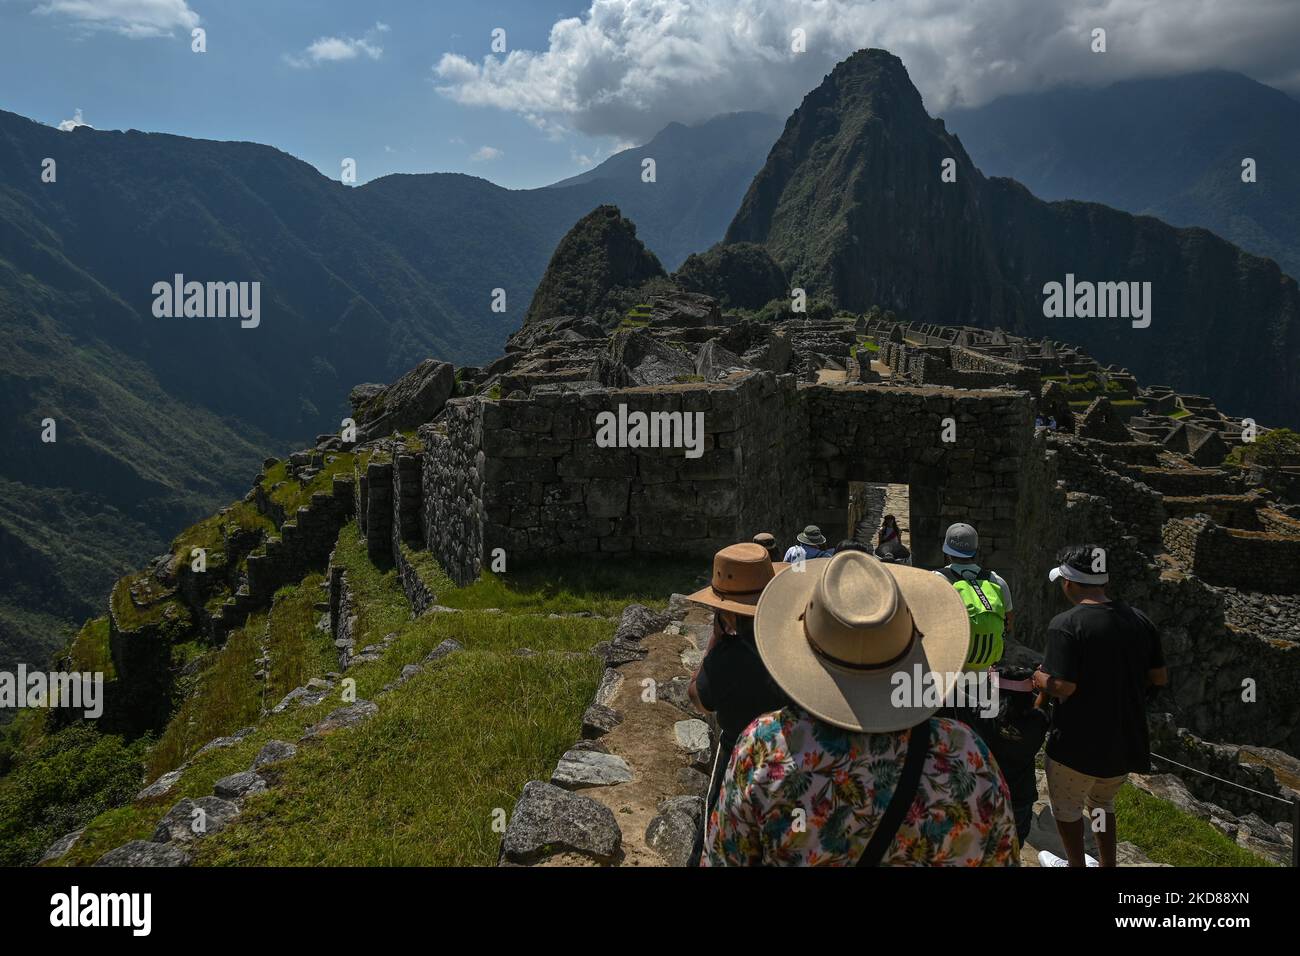 Tourists explore the ancient Inca city of Machu Picchu located in the Andes at an altitude of 2,430 meters (7,970 feet). The most famous icon of the Inca civilization was declared a Peruvian Historical Sanctuary in 1981, a UNESCO World Heritage Site in 1983, and in 2007 was then declared one of the Seven New Wonders of the World. On Wednesday, 20 April 2022, in Historic Sanctuary of Machu Picchu, Urubamba Province, Peru. (Photo by Artur Widak/NurPhoto) Stock Photo